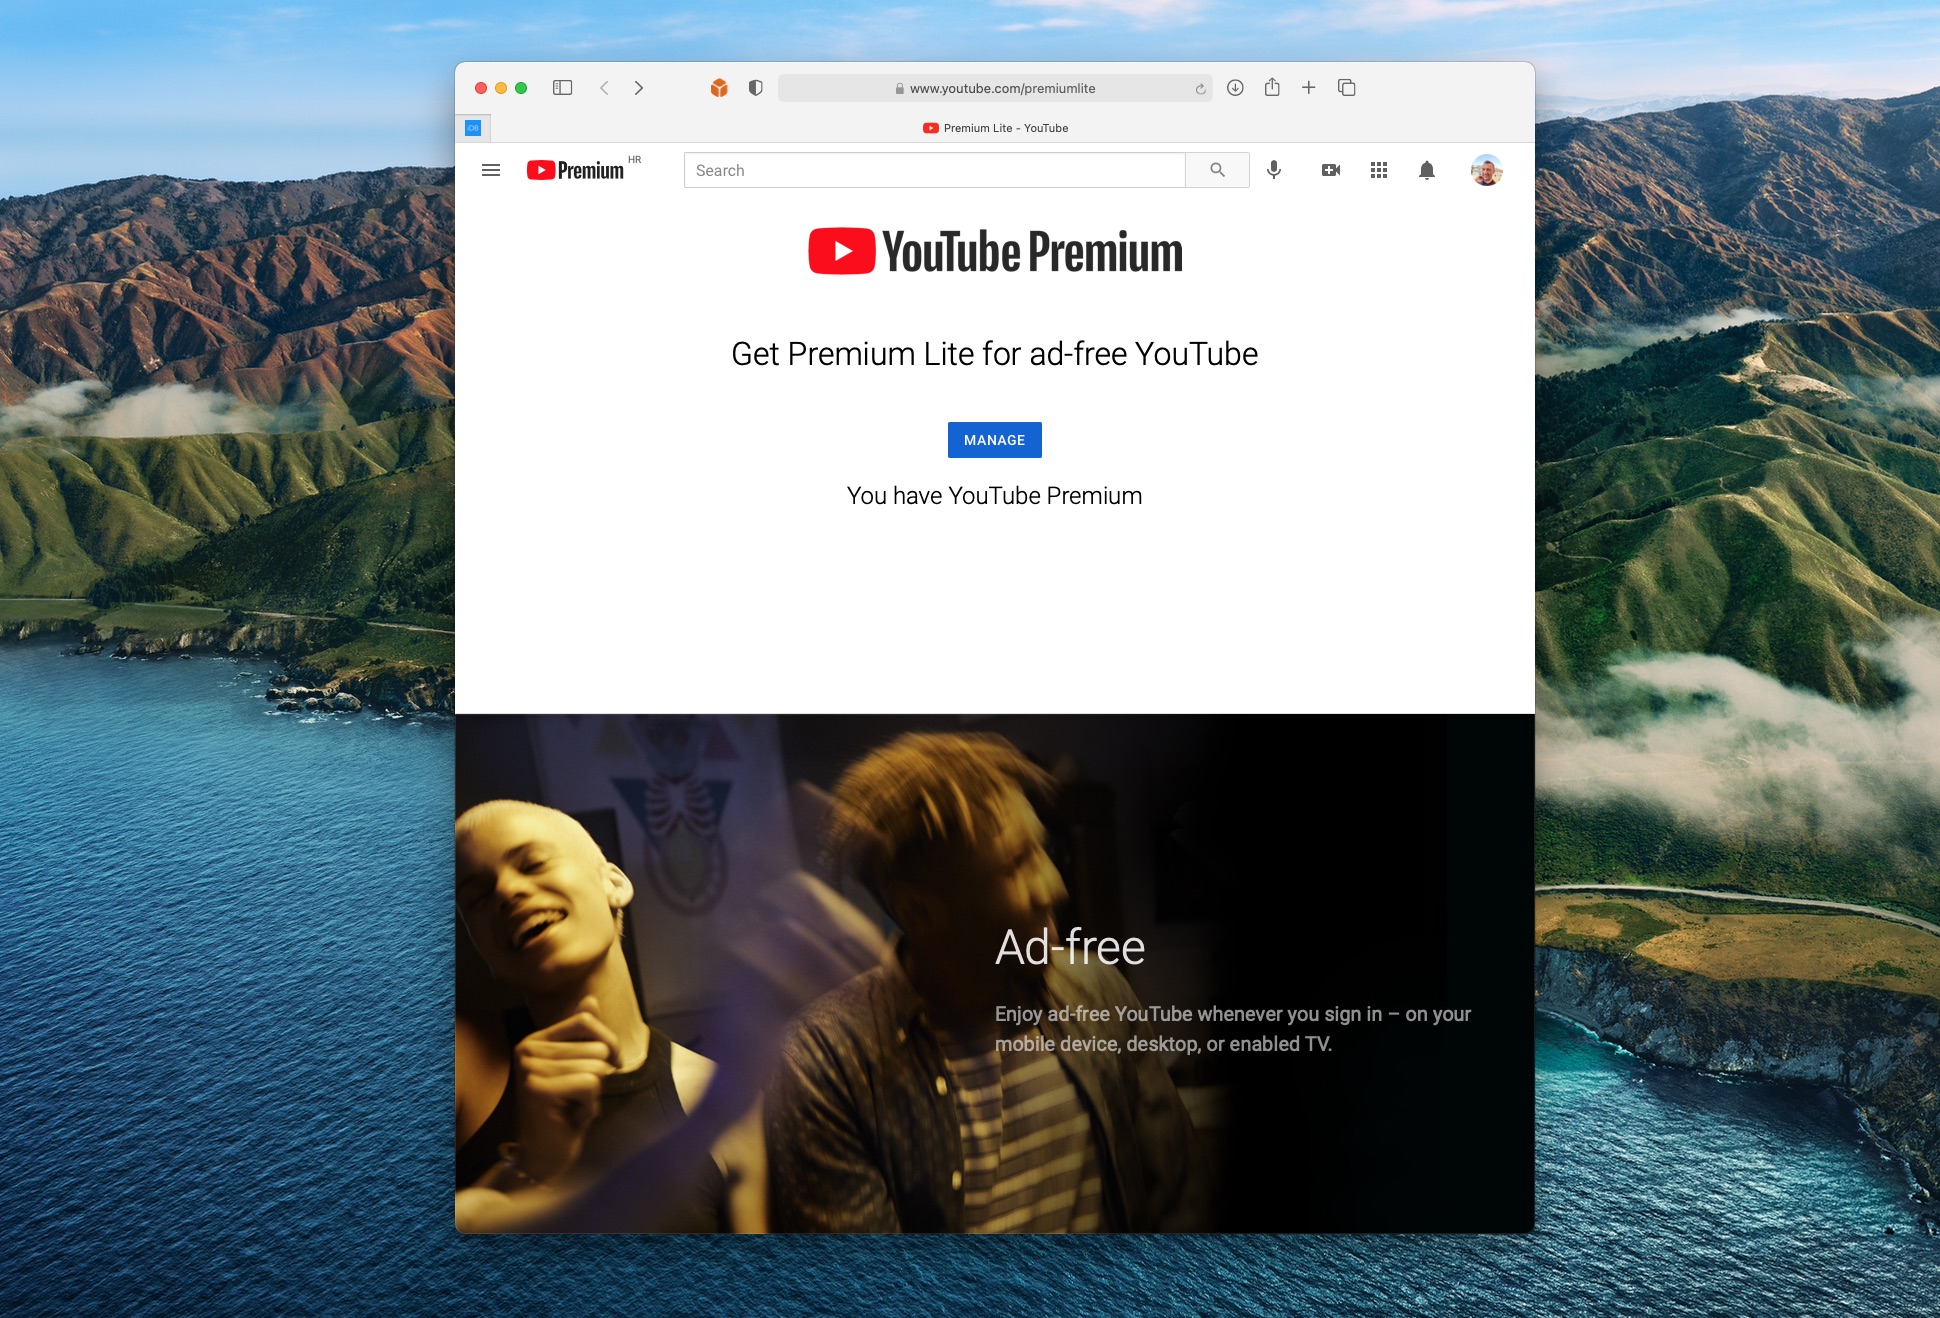 Google is testing a new, cheaper YouTube subscription that gets rid of ads